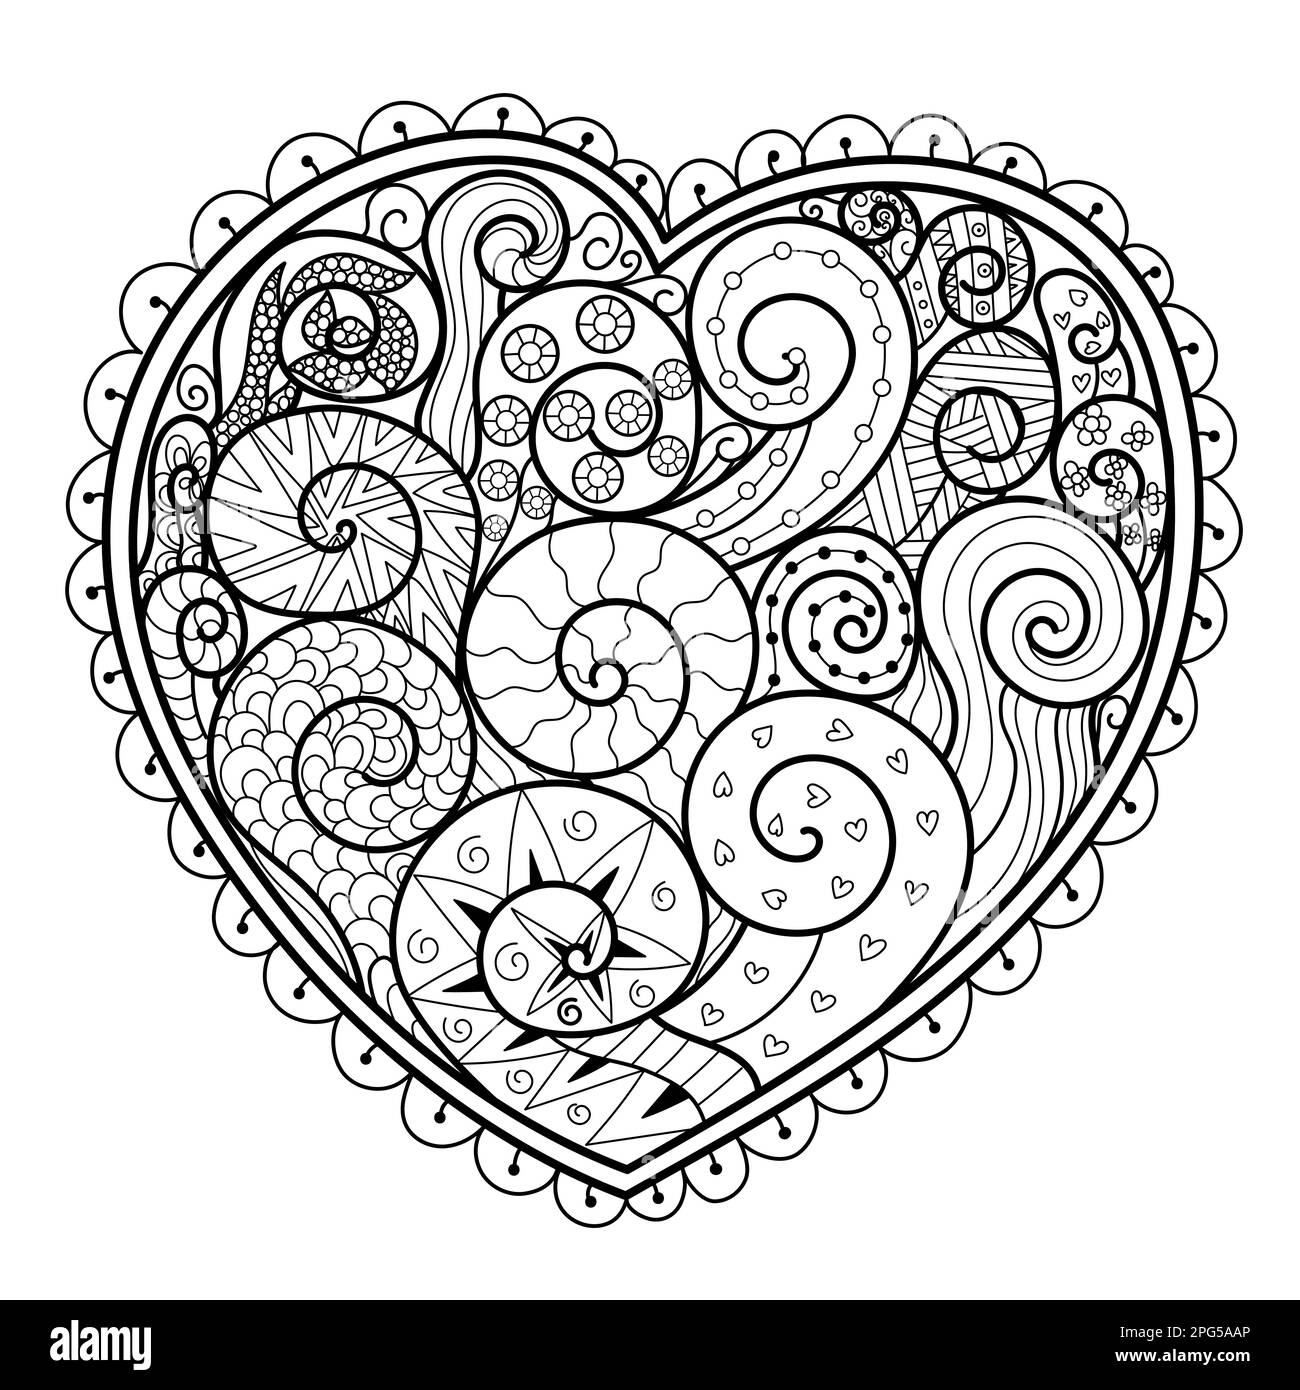 Hand drawn doodle heart coloring page black and white valentines day pattern stock vector image art